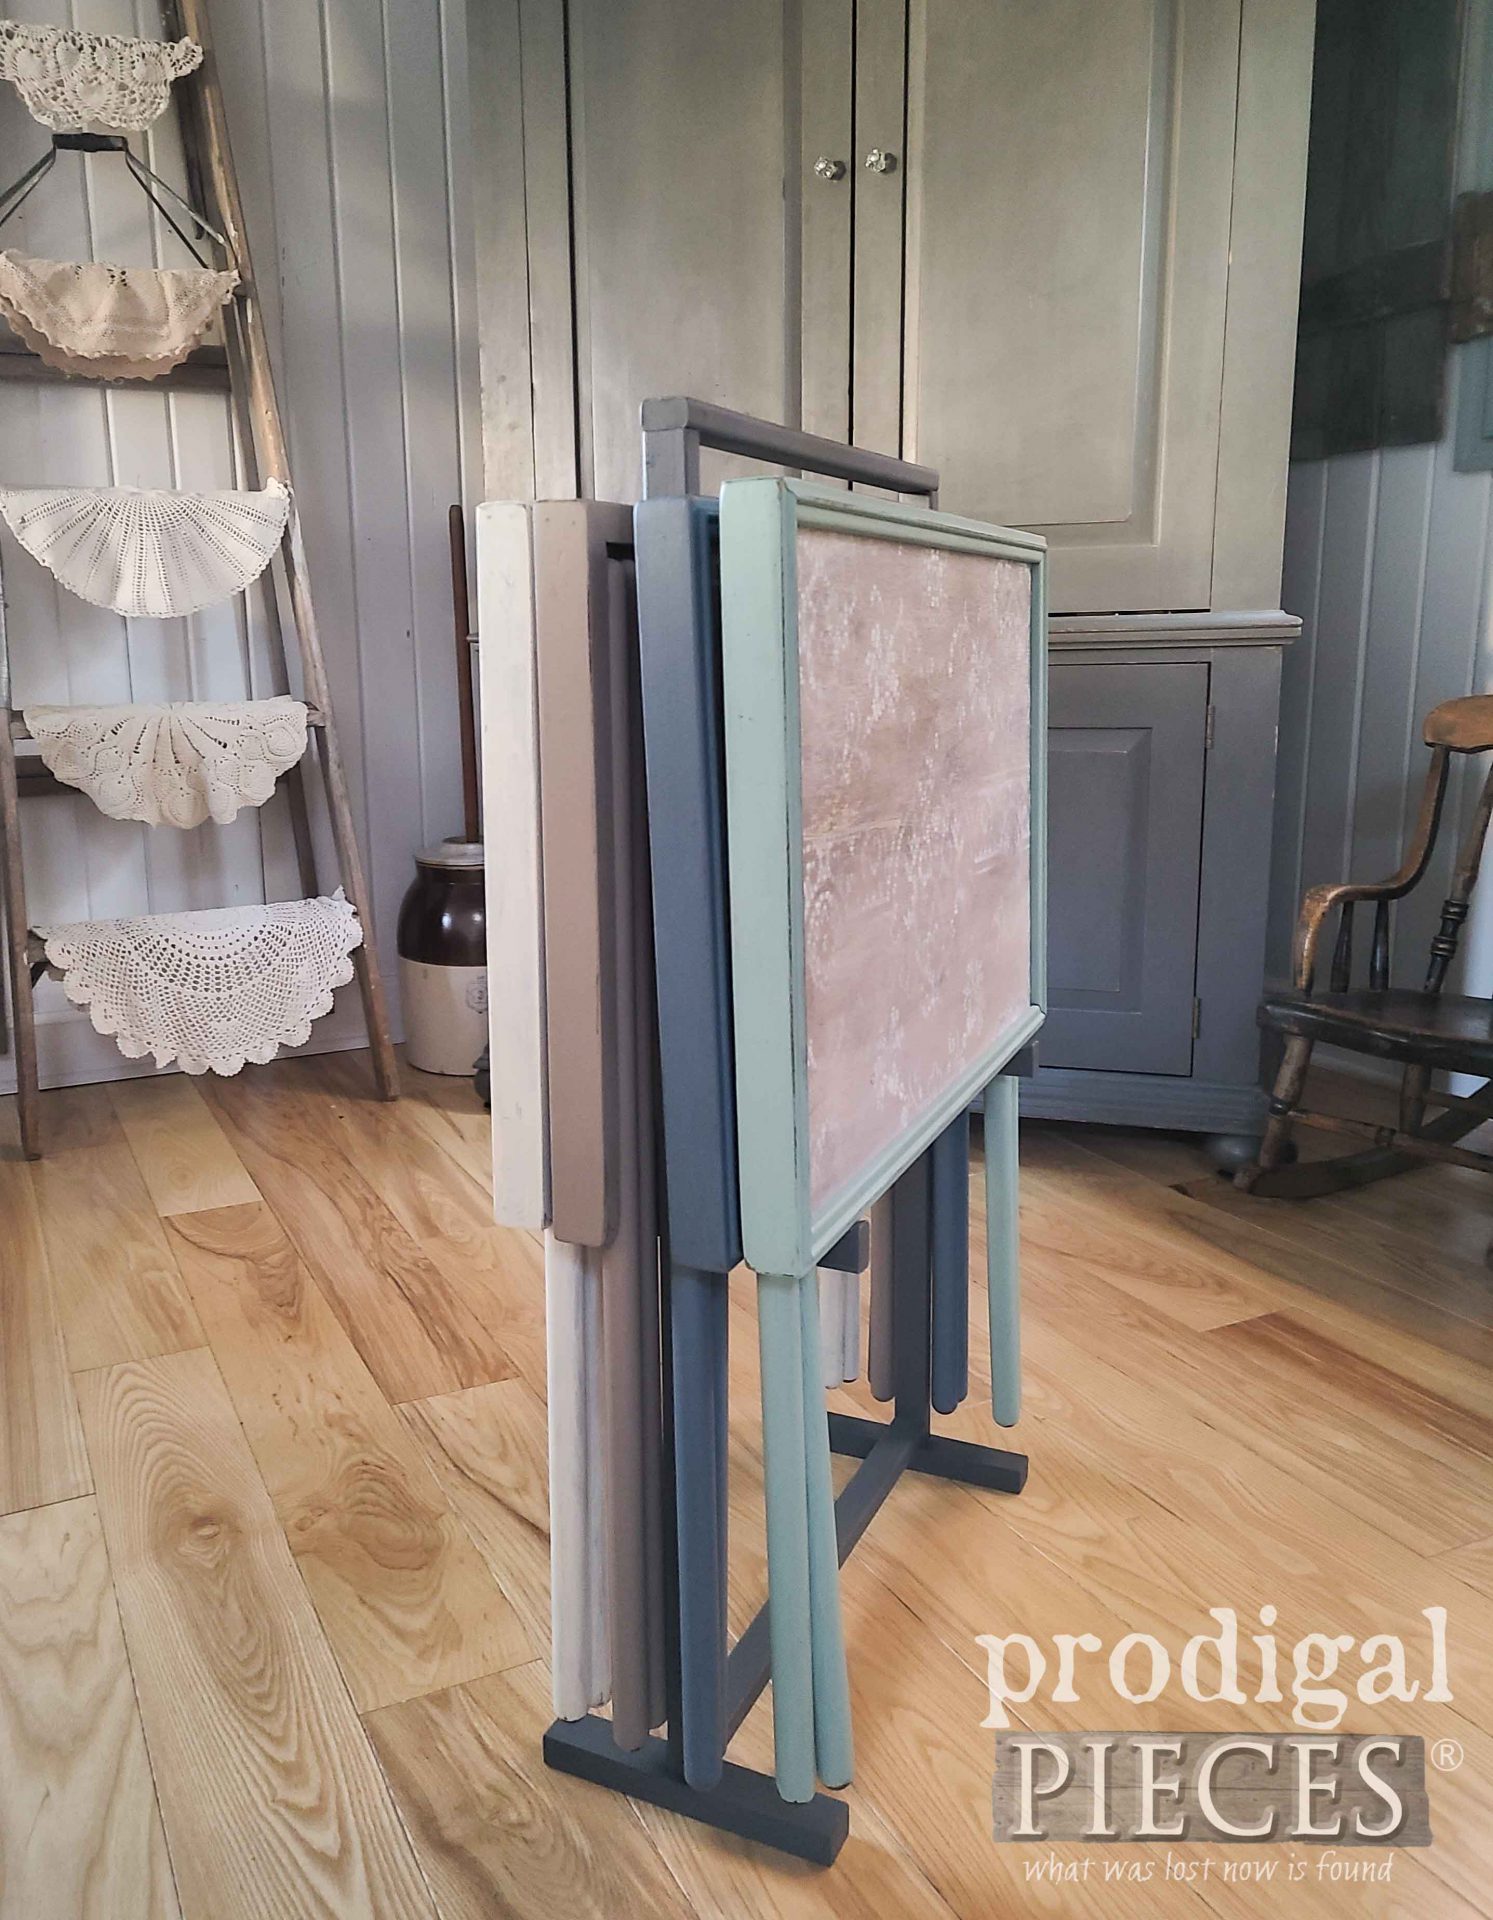 Stacked on Stand Vintage TV Trays by Larissa of Prodigal Pieces | prodigalpieces.com #prodigalpieces #vintage #furniture #tv #farmhouse